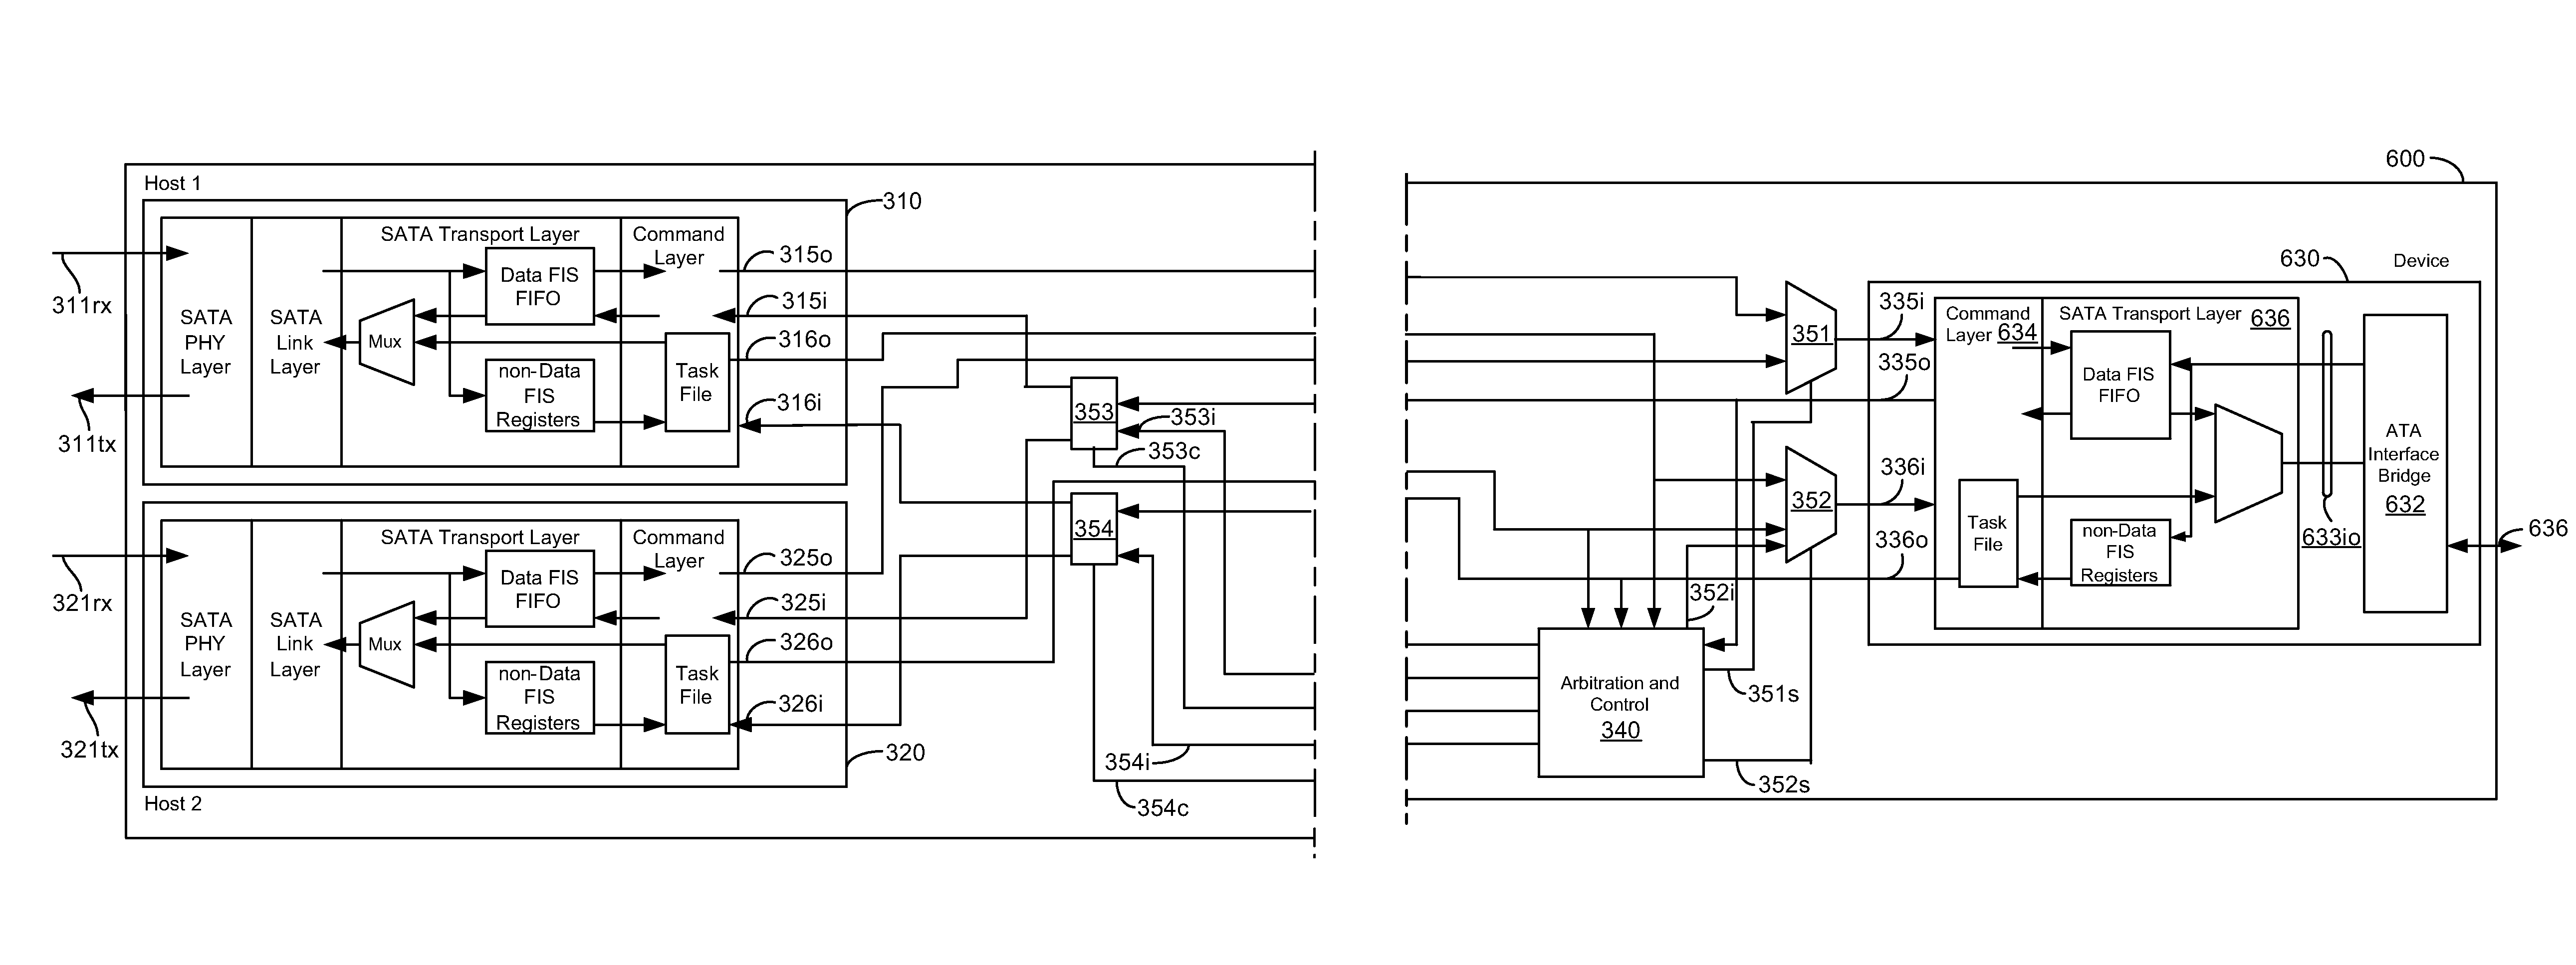 Switching serial advanced technology attachment (SATA) to a parallel interface